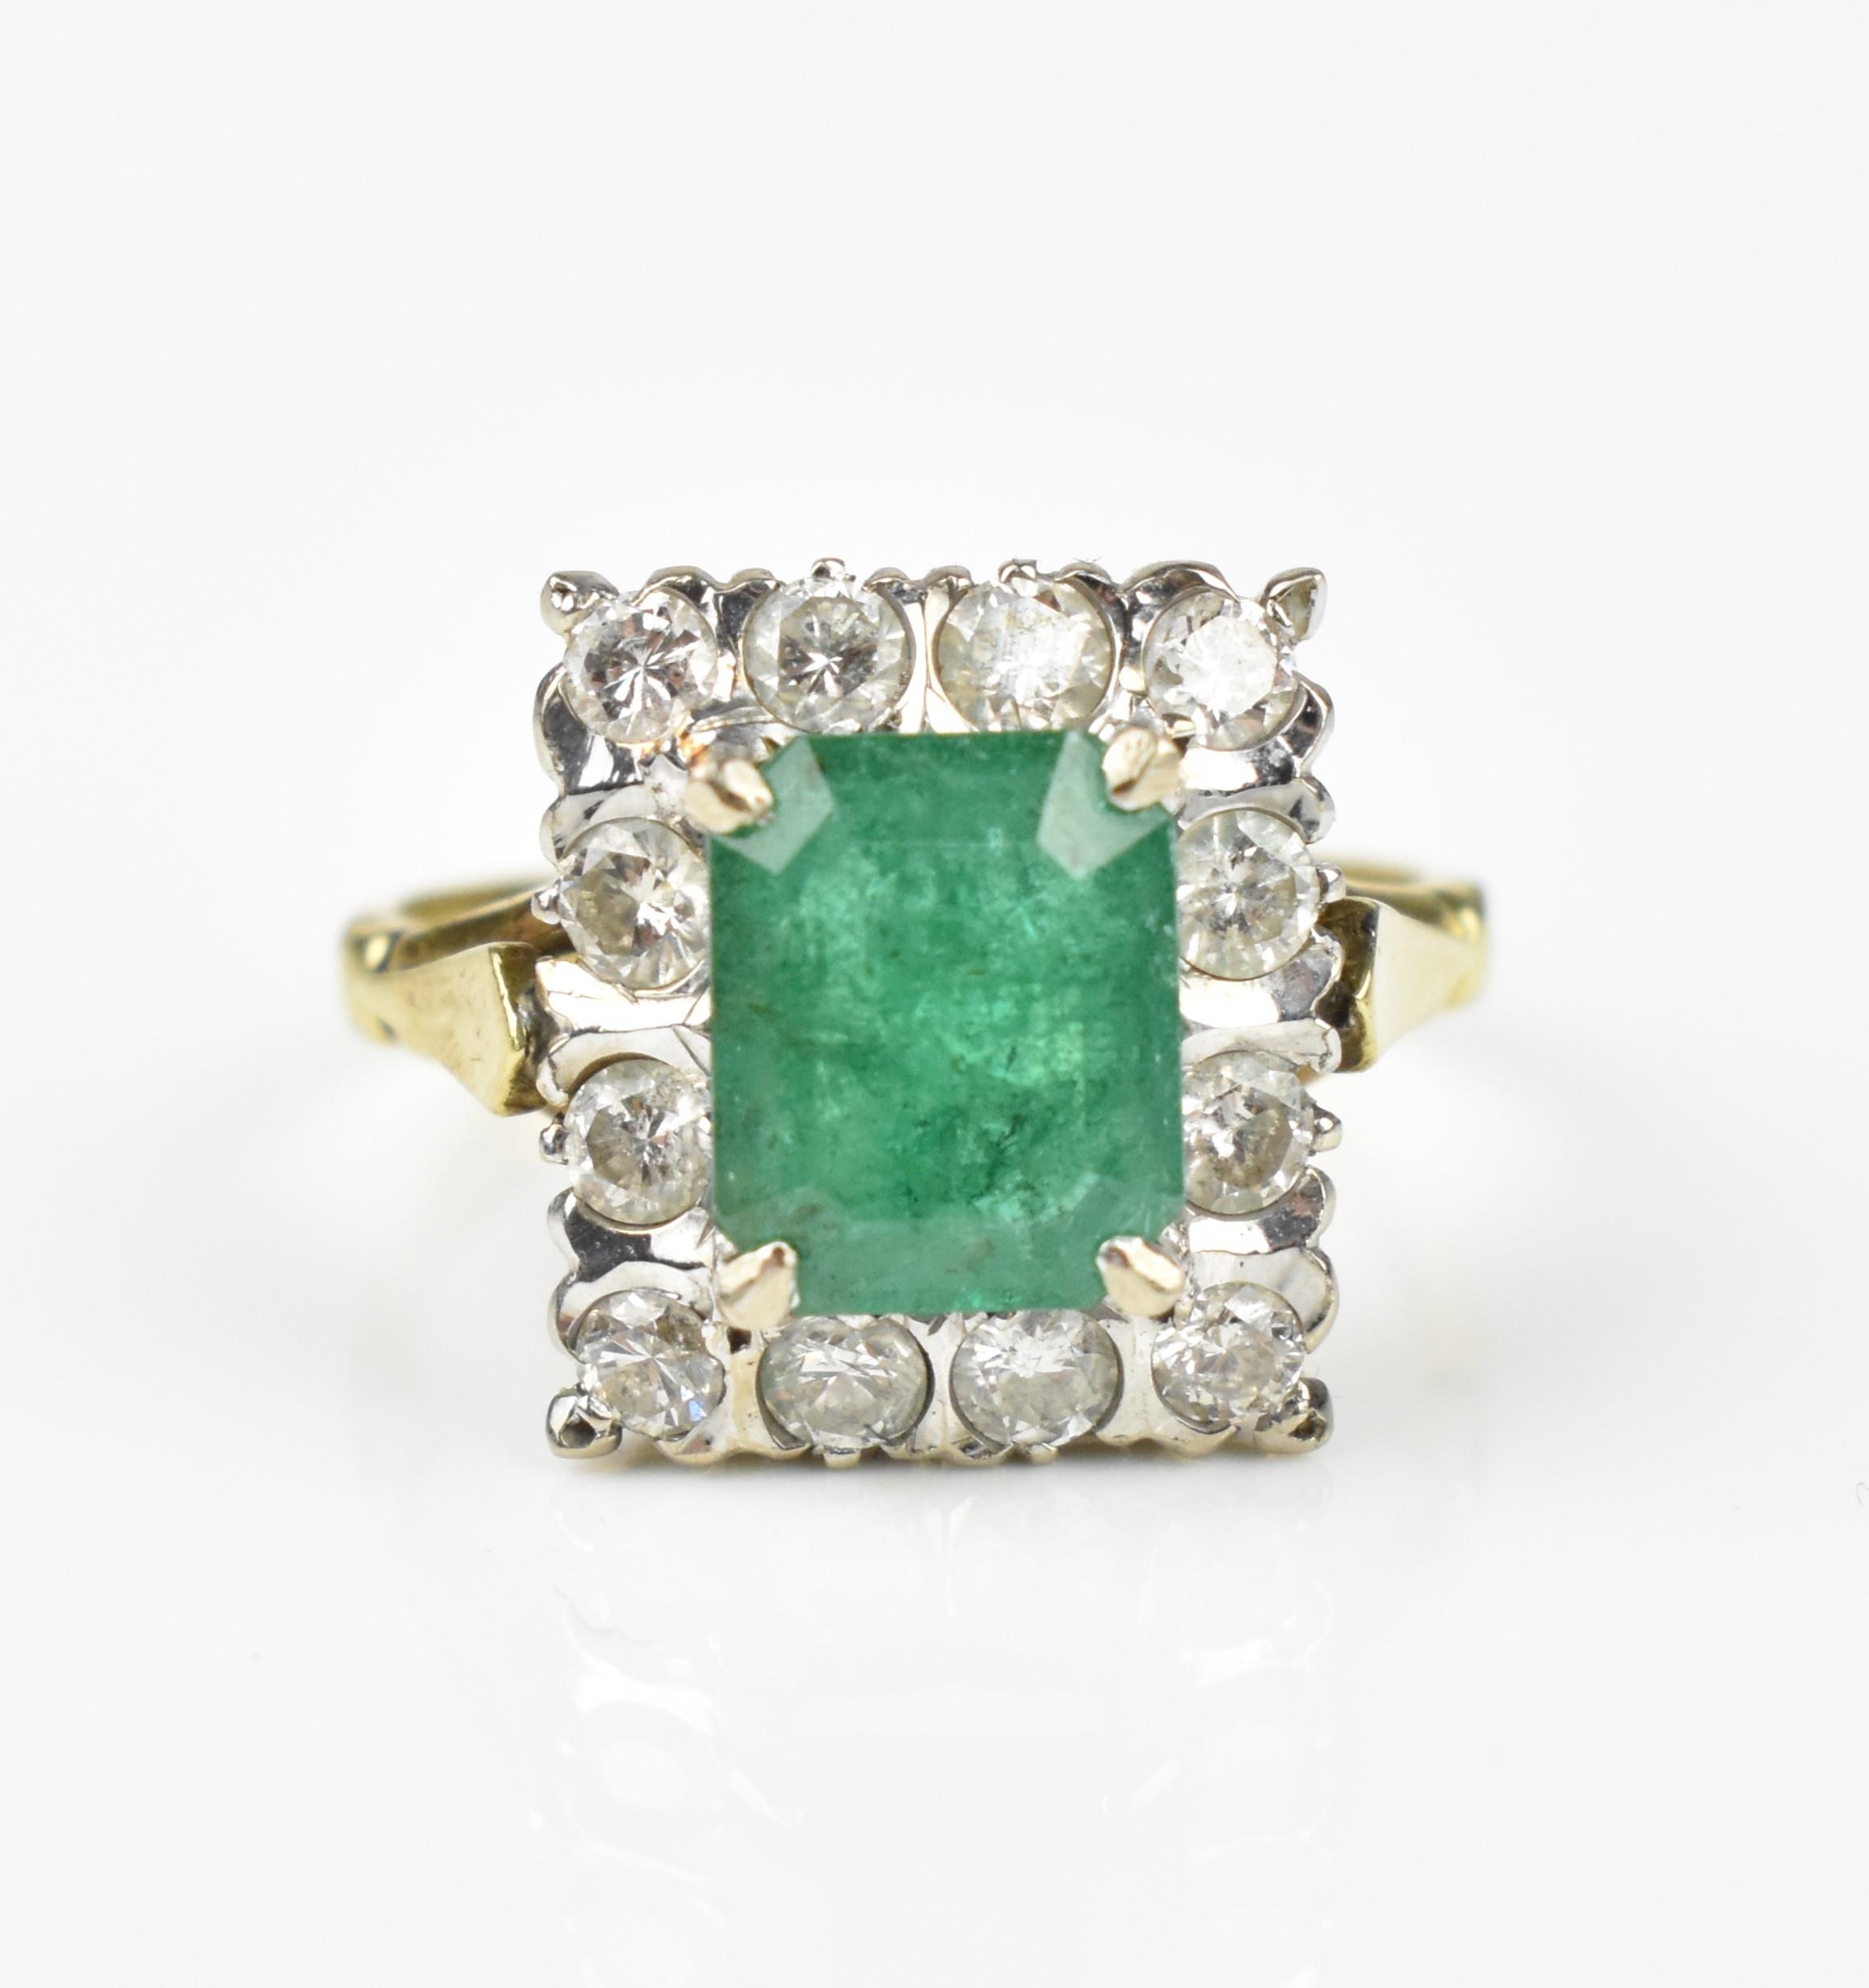 An 18ct yellow gold, emerald and diamond dress ring, with central step cut emerald in a halo of